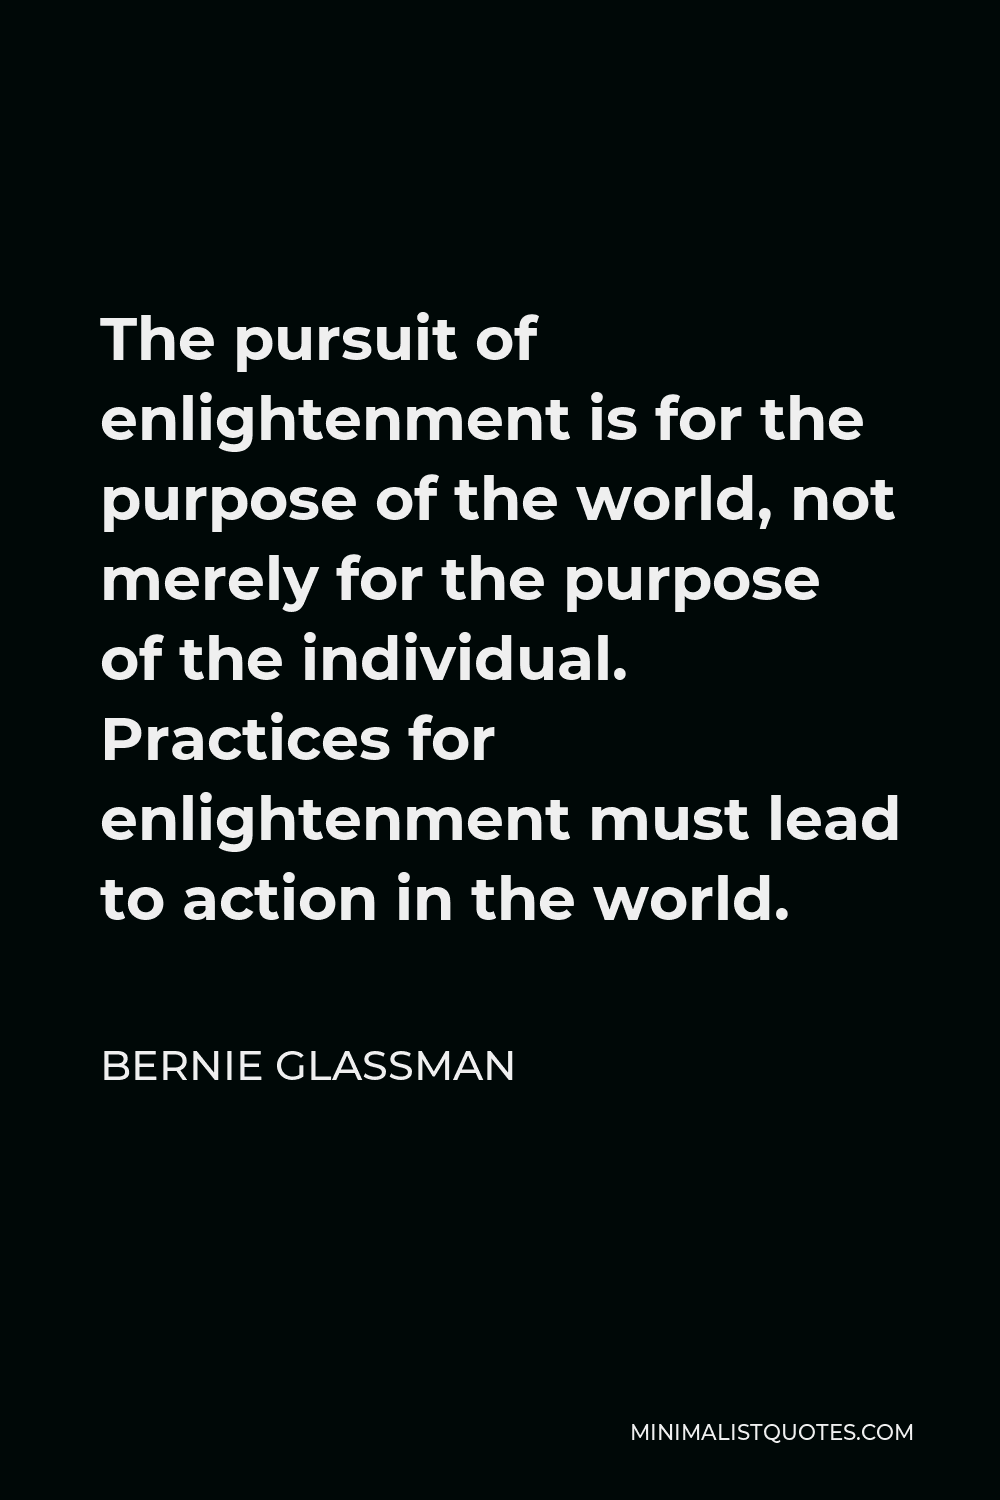 Bernie Glassman Quote - The pursuit of enlightenment is for the purpose of the world, not merely for the purpose of the individual. Practices for enlightenment must lead to action in the world.